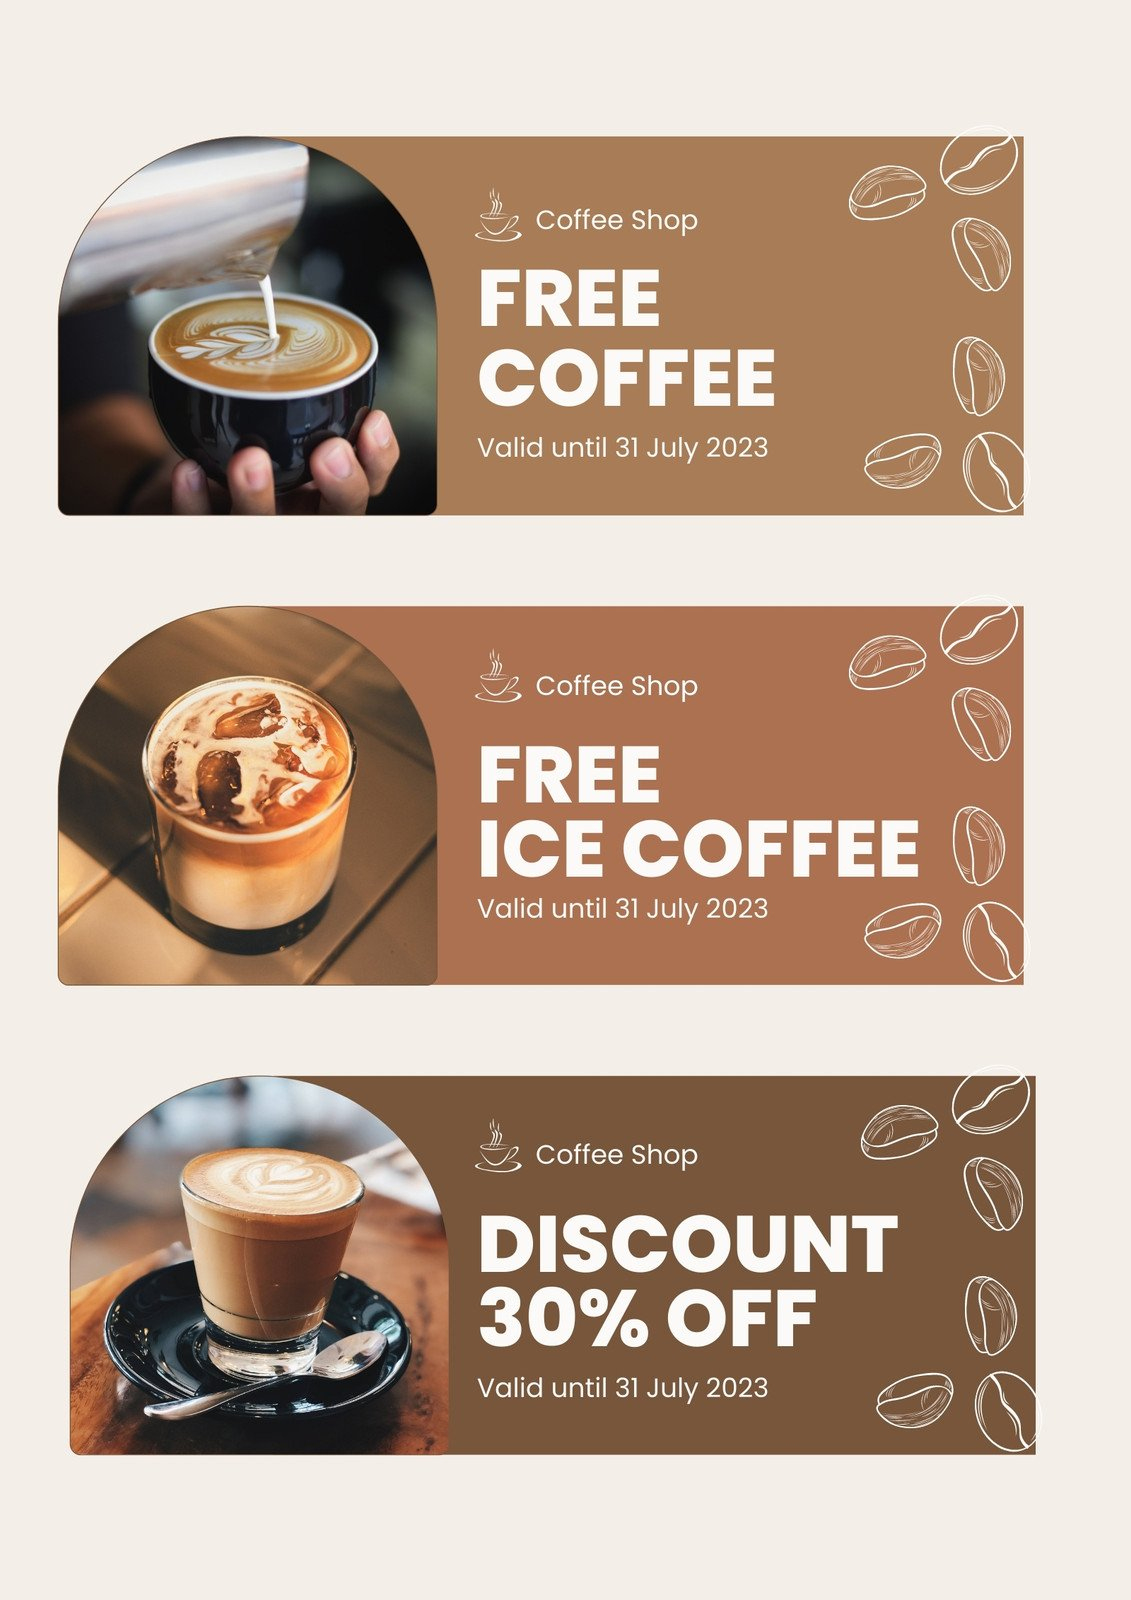 Customize 40+ Coffee Coupon Templates Online - Canva with regard to Free Coffee Coupons Printable